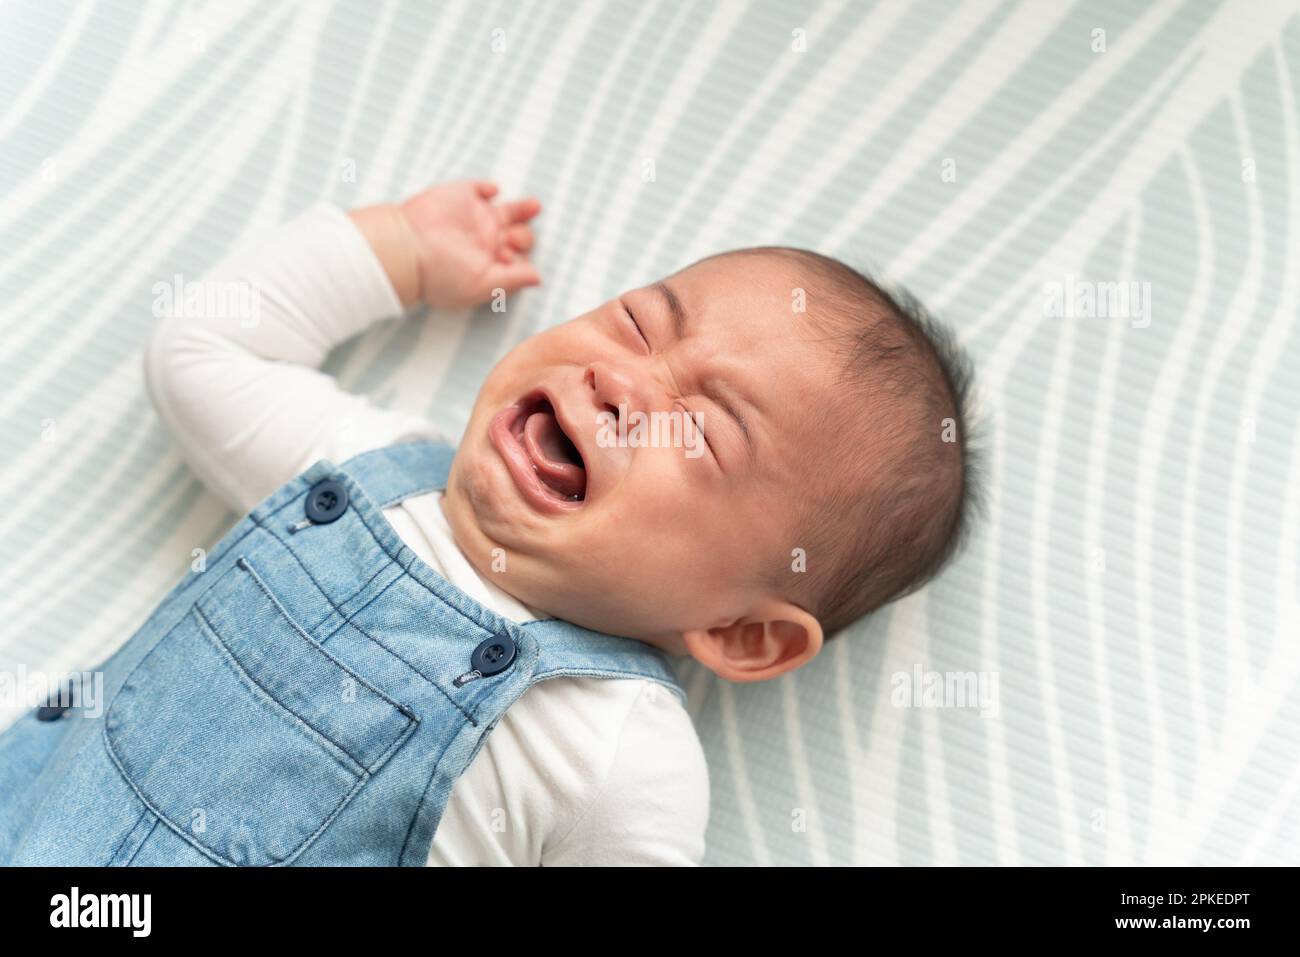 Baby crying on the floor Stock Photo